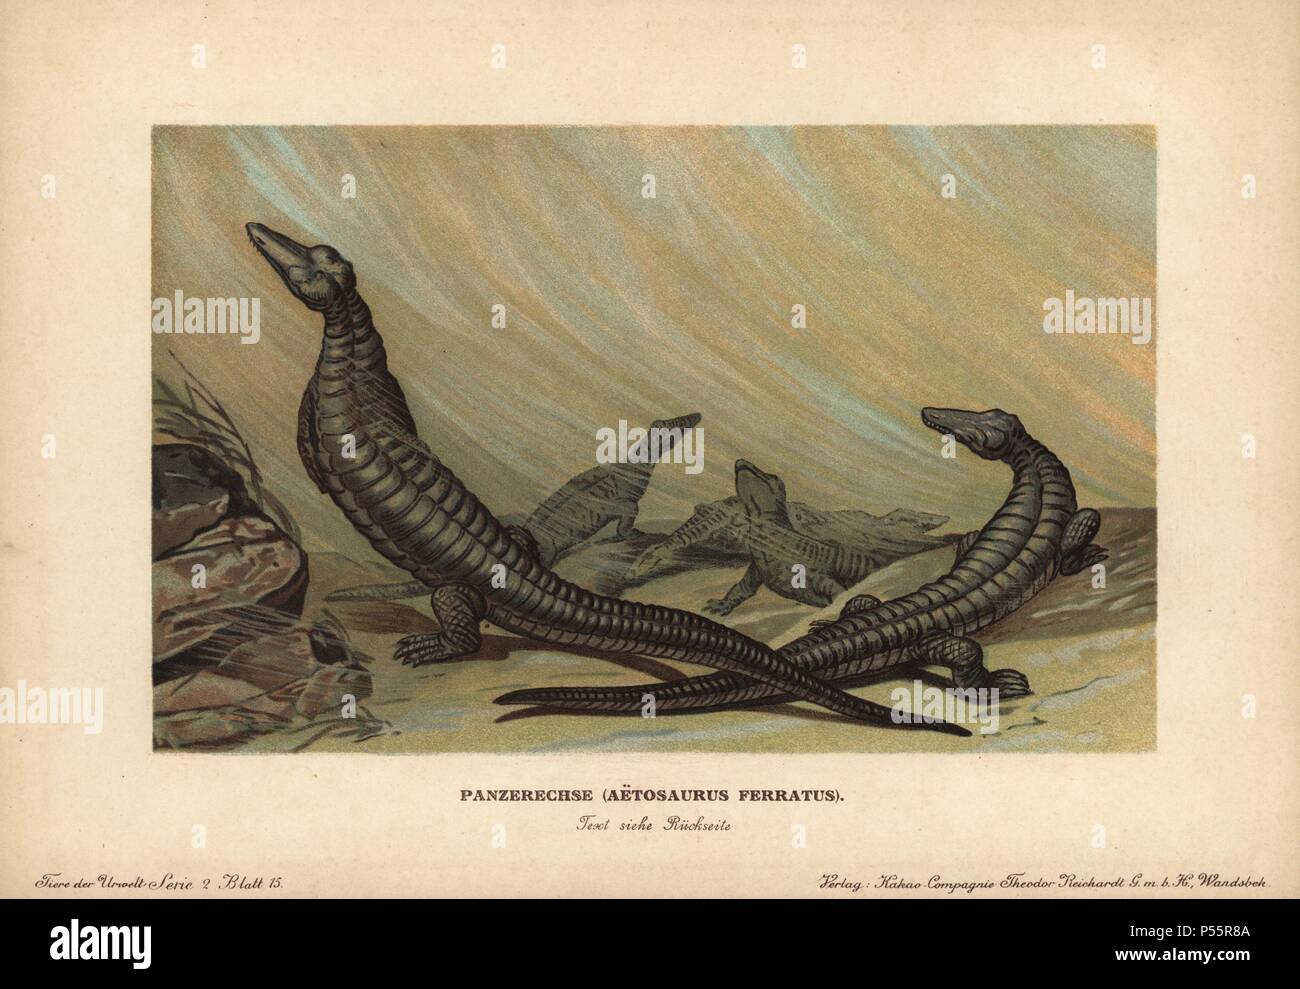 Aetosaurus, Panserechse, Aetosaurus ferratus, extinct genus of archosaur reptile. Colour printed (chromolithograph) illustration by F. John from 'Tiere der Urwelt' Animals of the Prehistoric World, 1910, Hamburg. From a series of prehistoric creature cards published by the Reichardt Cocoa company. Stock Photo